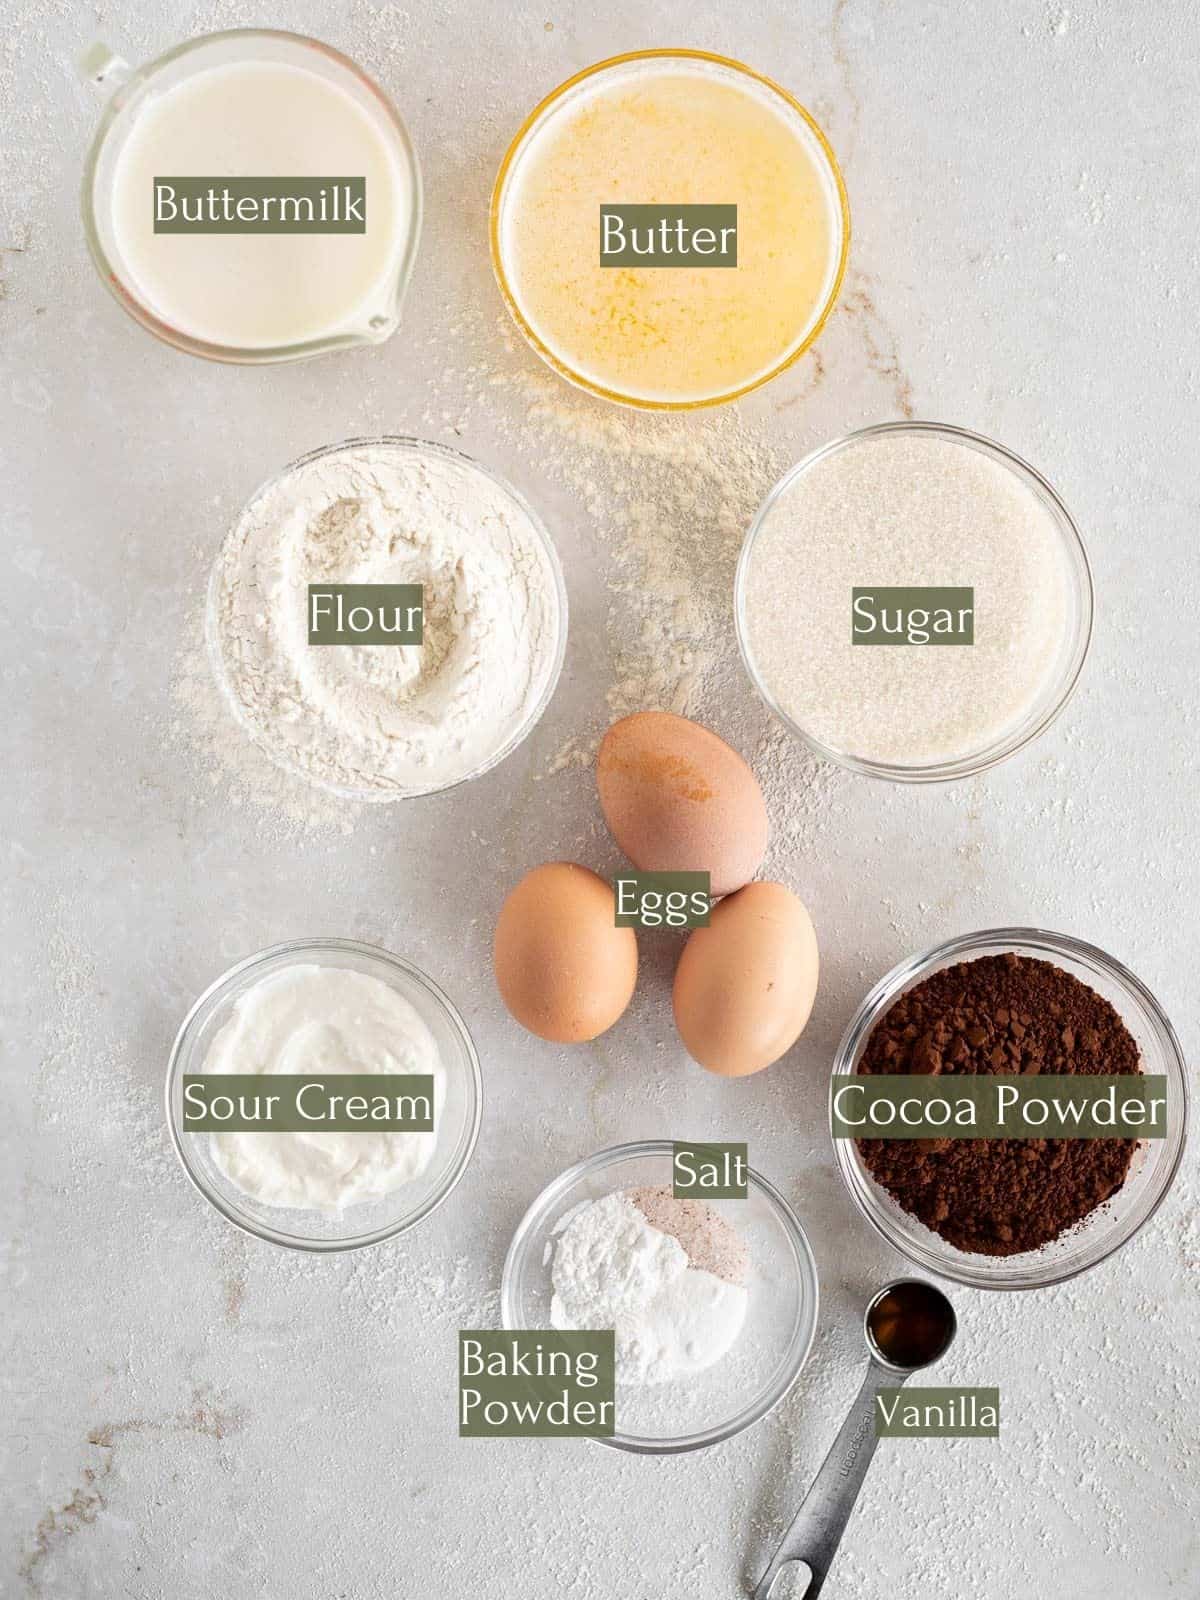 Ingredients to make a buttermilk marble bundt cake labeled with green text boxes and white text.